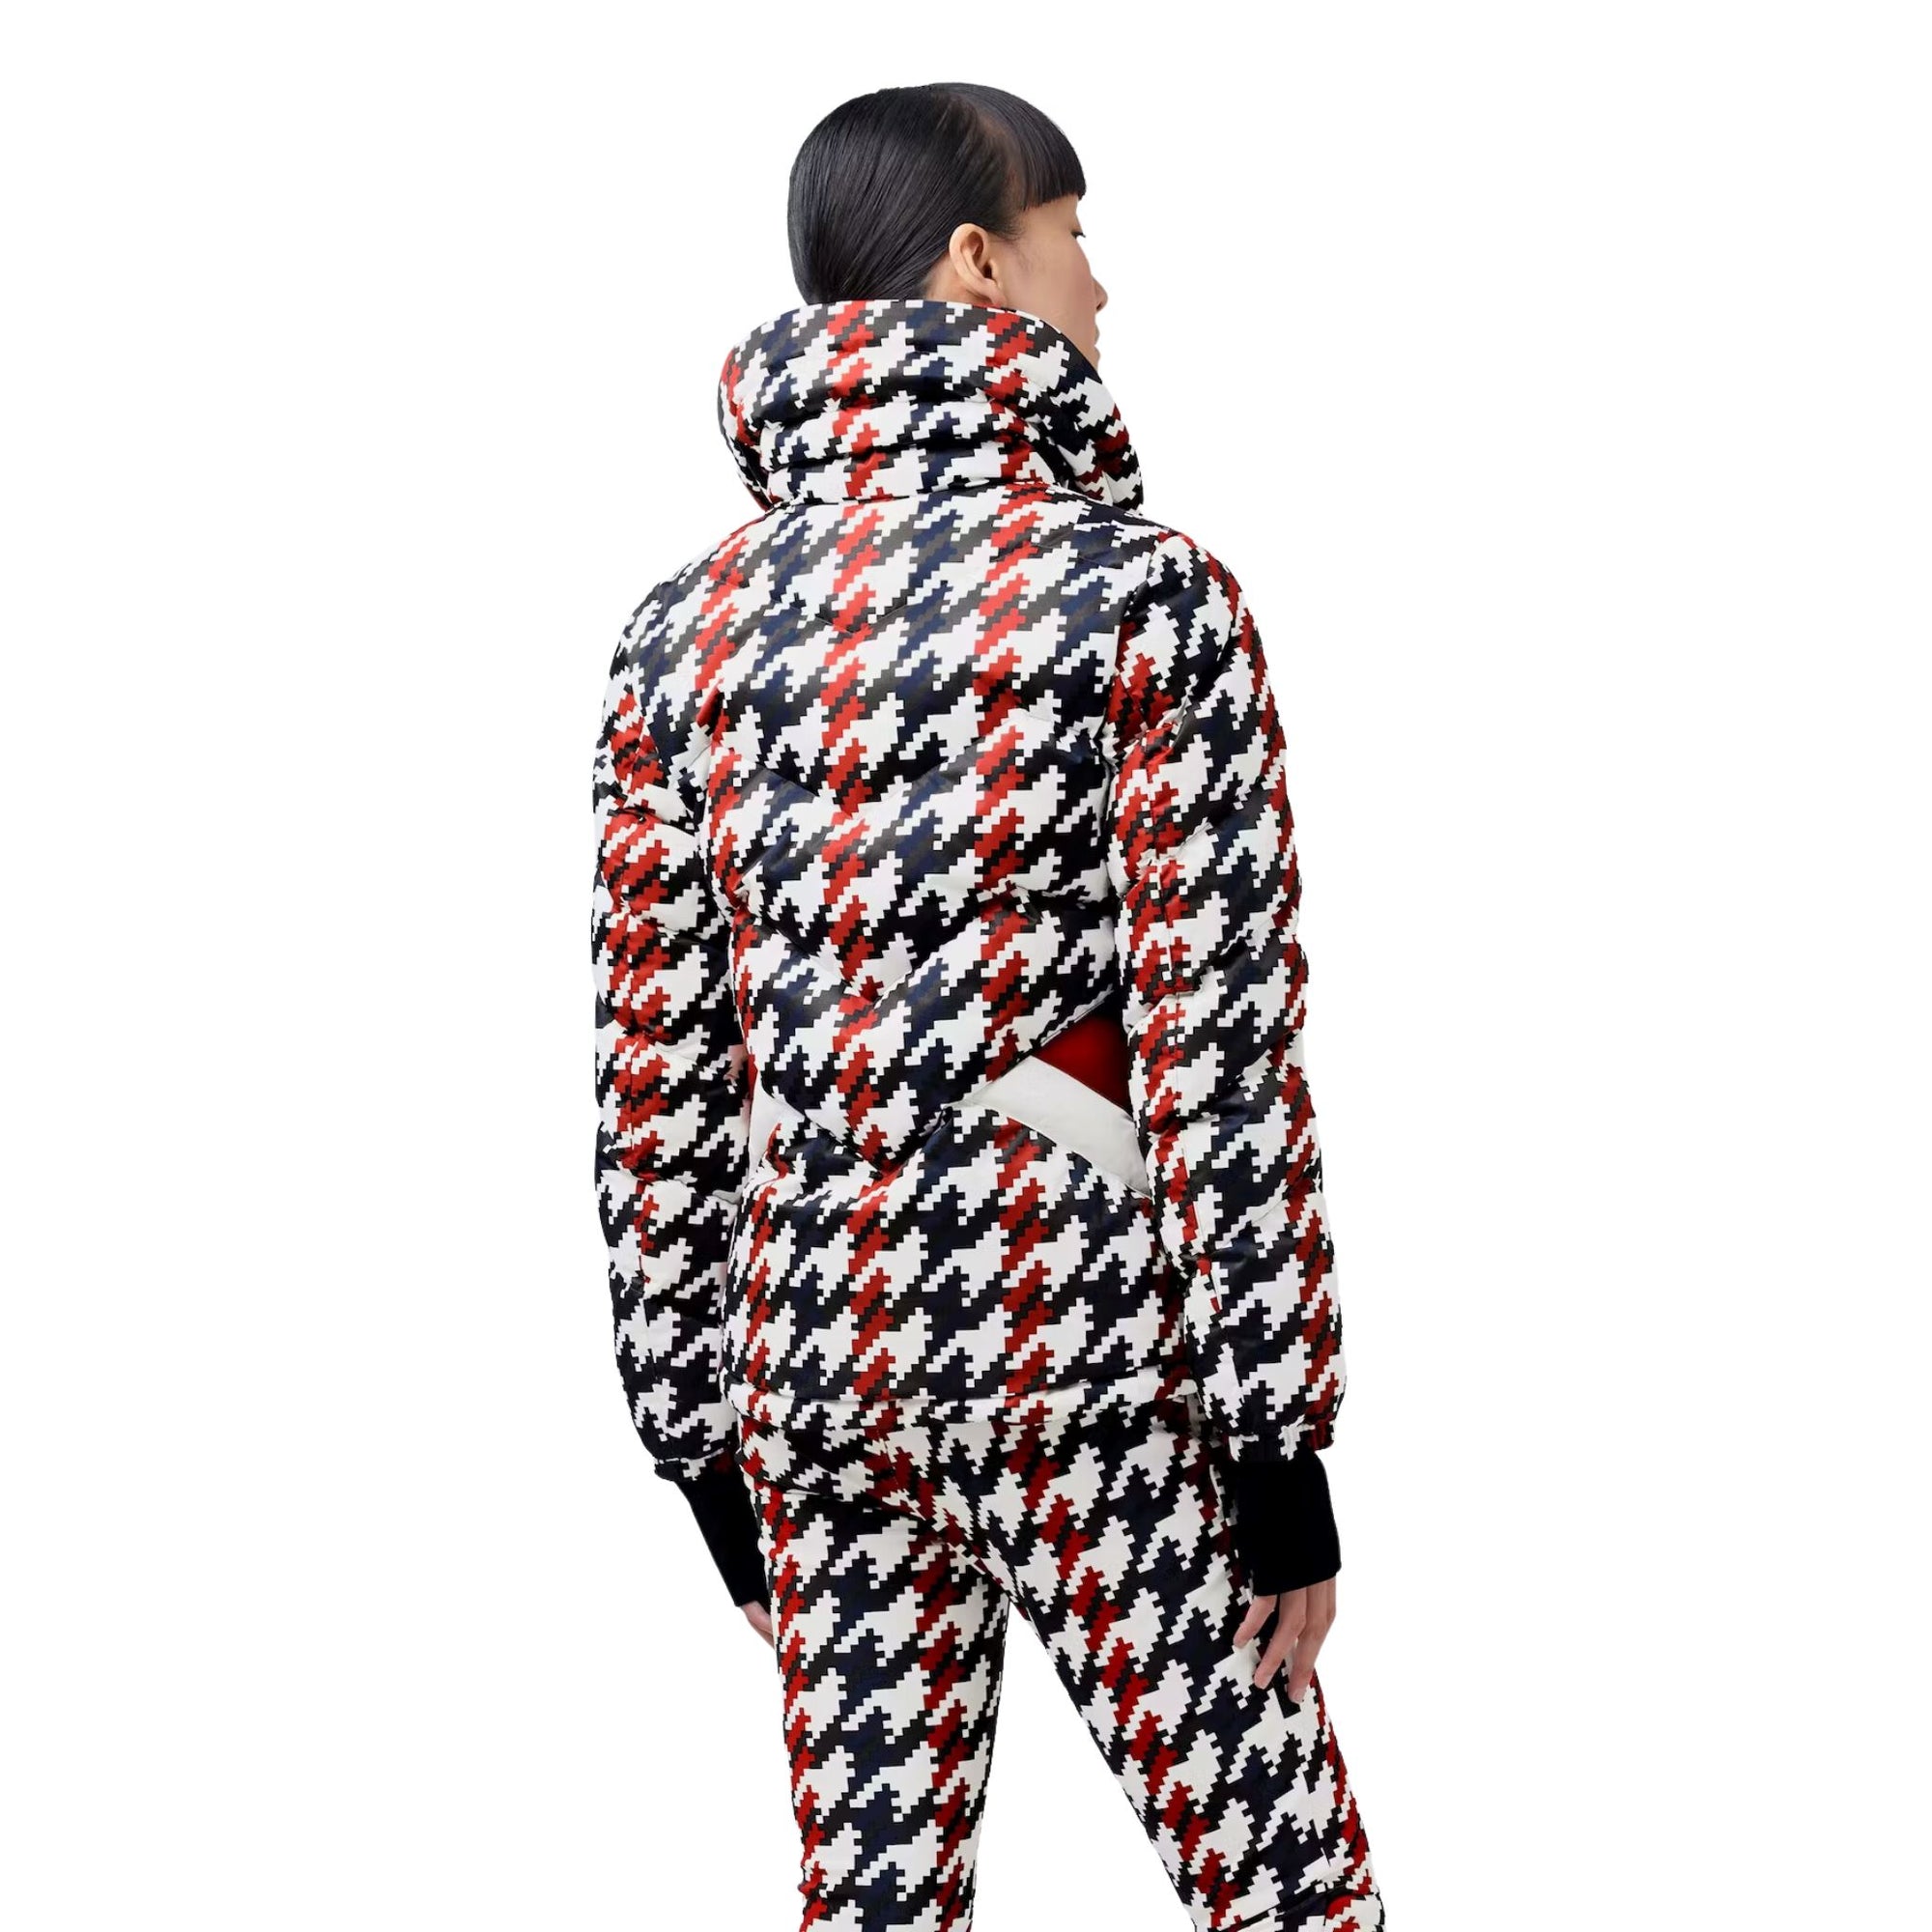 Womens Perfect Moment Ski Duvet Jacket - Houndstooth Red/Navy Jackets Perfect Moment XS INTL / 6-8 AU 